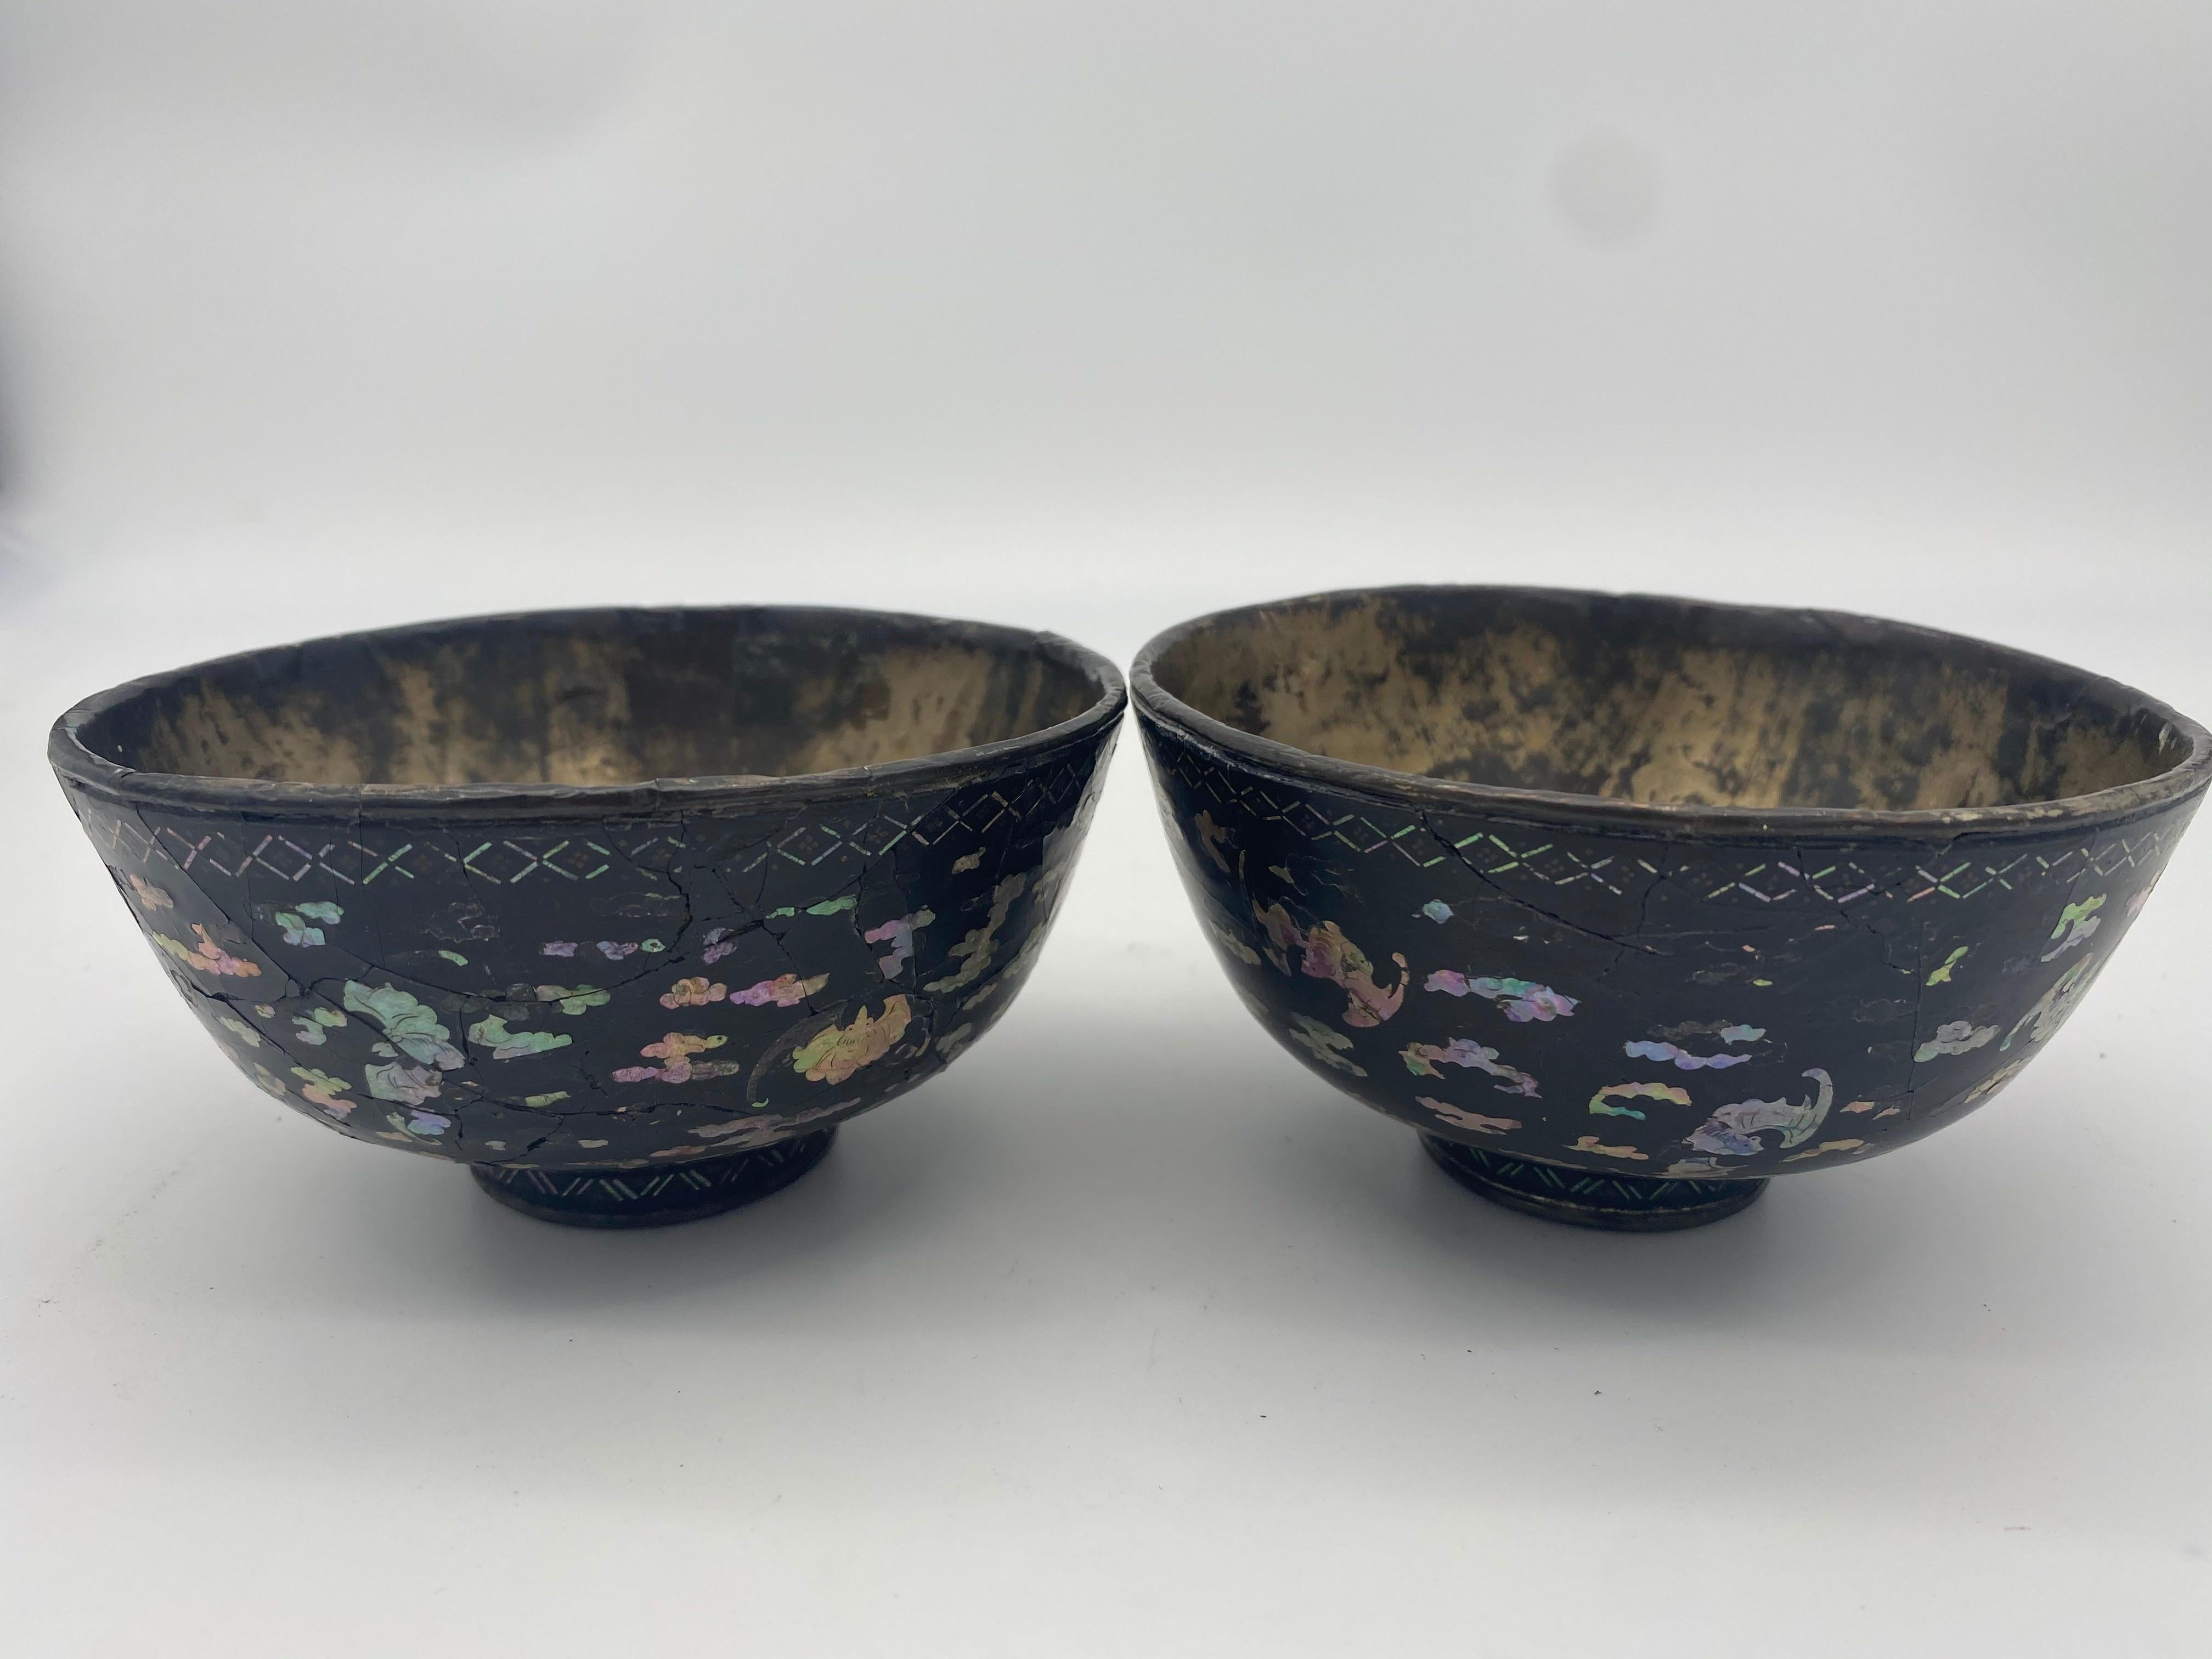 18th Century Pair of Chinese Silver Lacquer Bowls with Mother of Pearl Inlaid For Sale 1